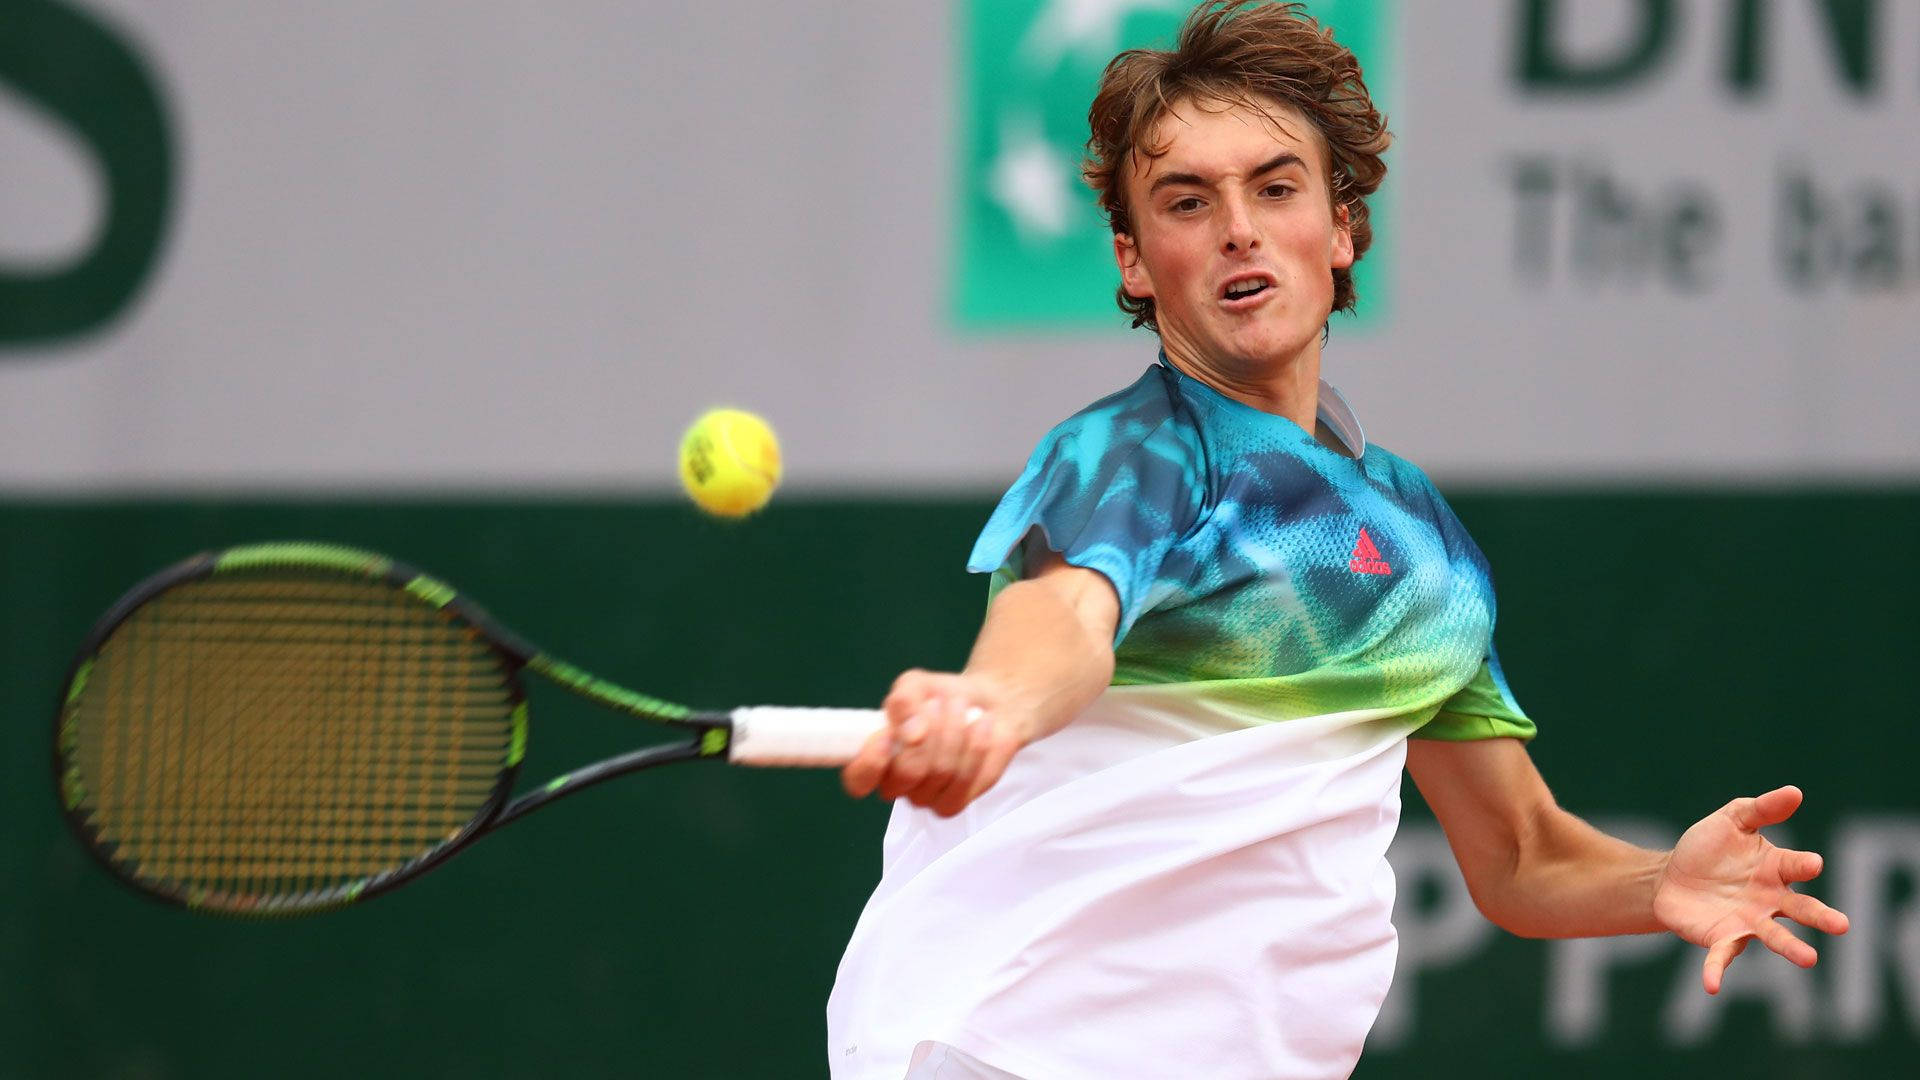 Young Stefanos Tsitsipas Perfecting His Tennis Craft Background